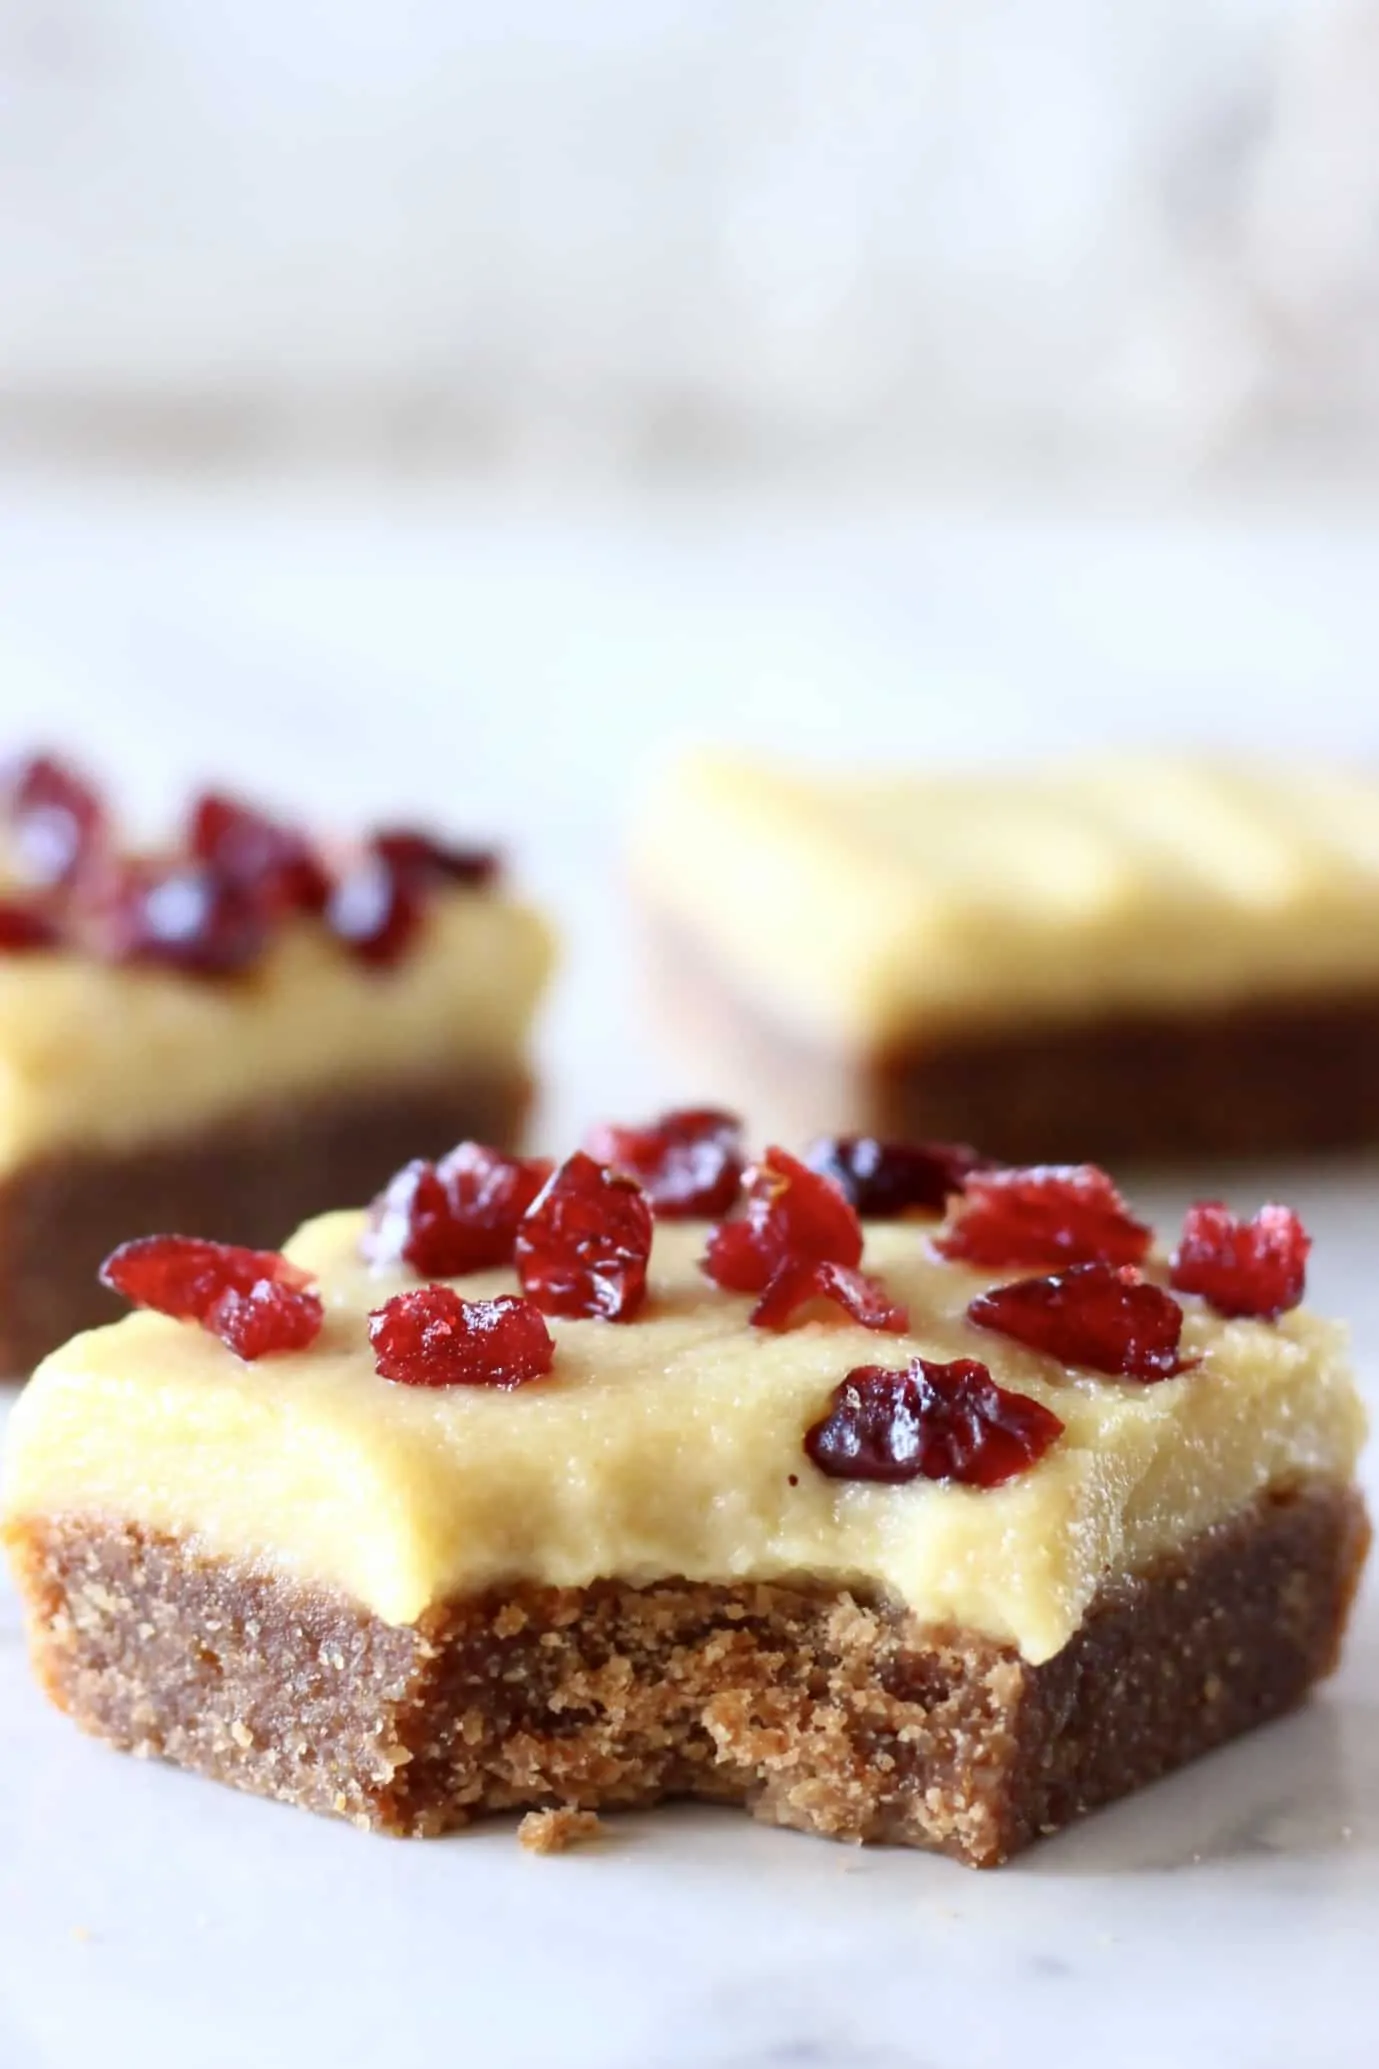 Three gluten-free vegan gingerbread cookie bars with frosting and dried cranberries with a bite taken out of one